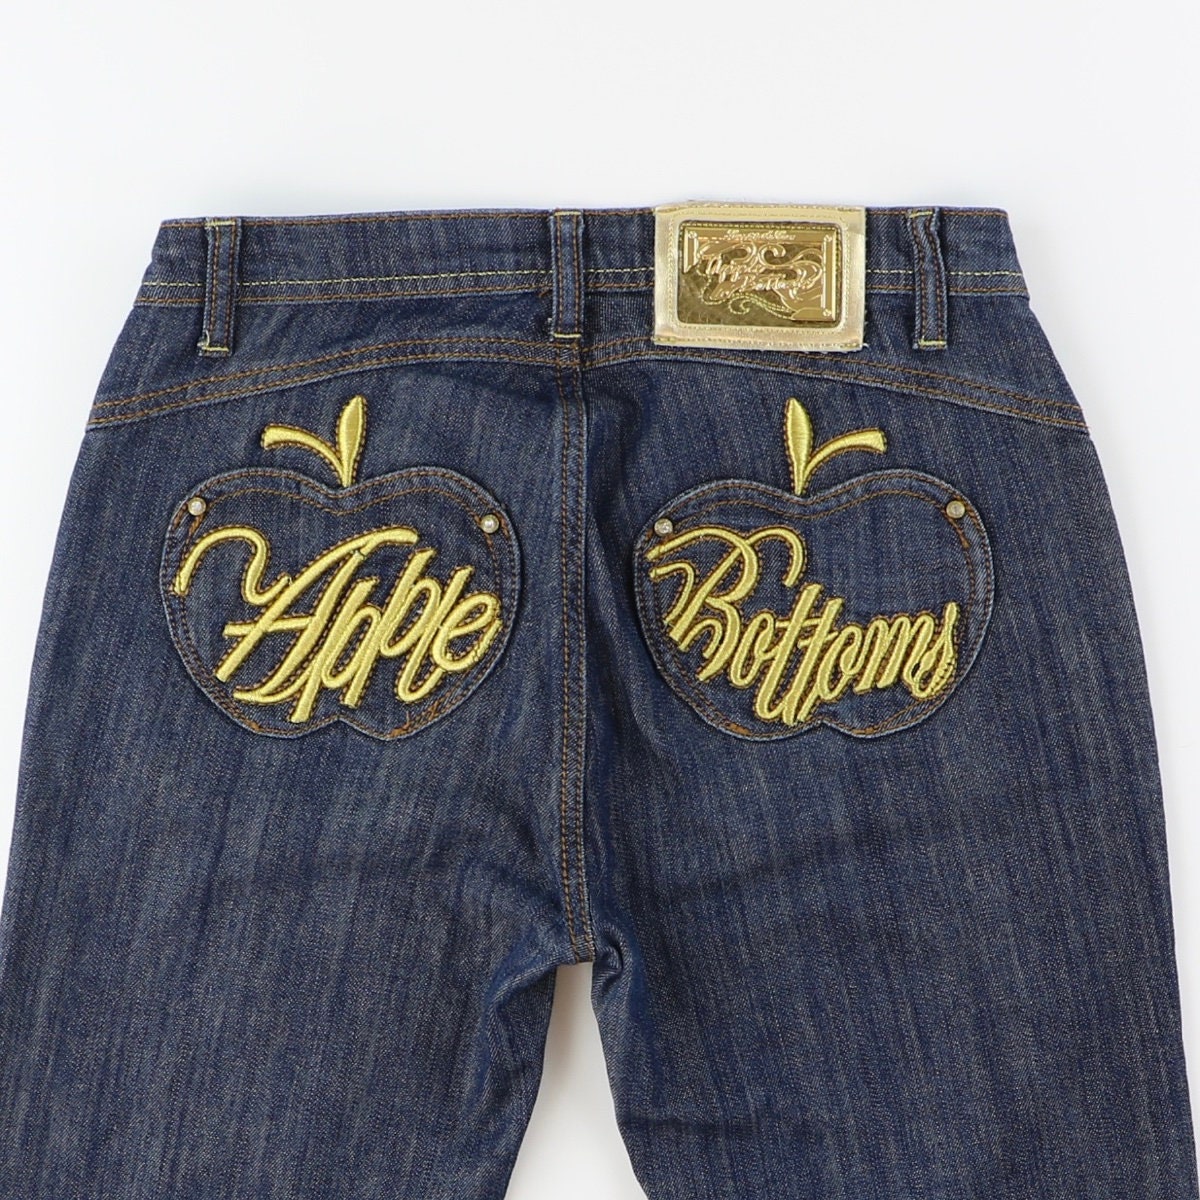 Apple Bottom Jeans Vintage Trousers Embroidered - Etsy